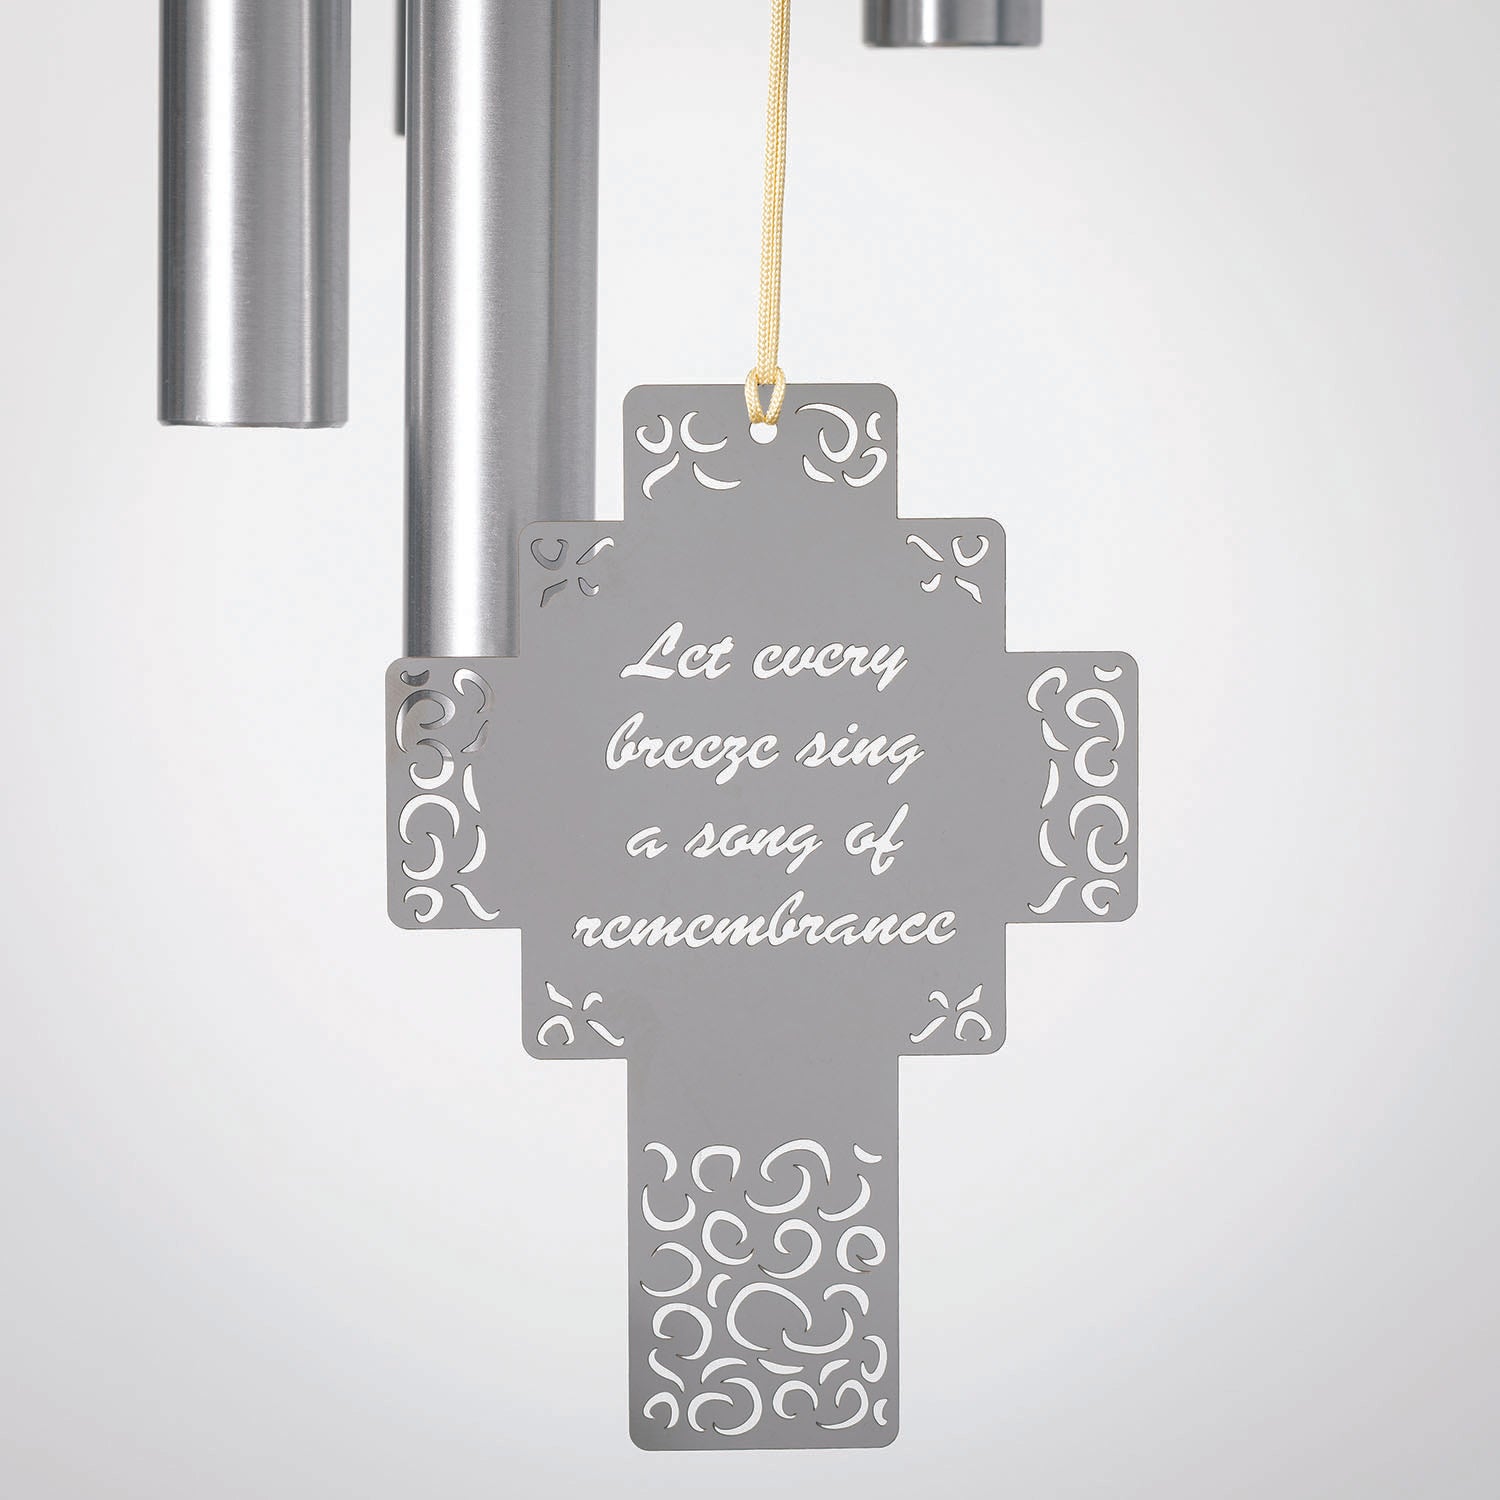 Chimes of Remembrance - Song closeup image